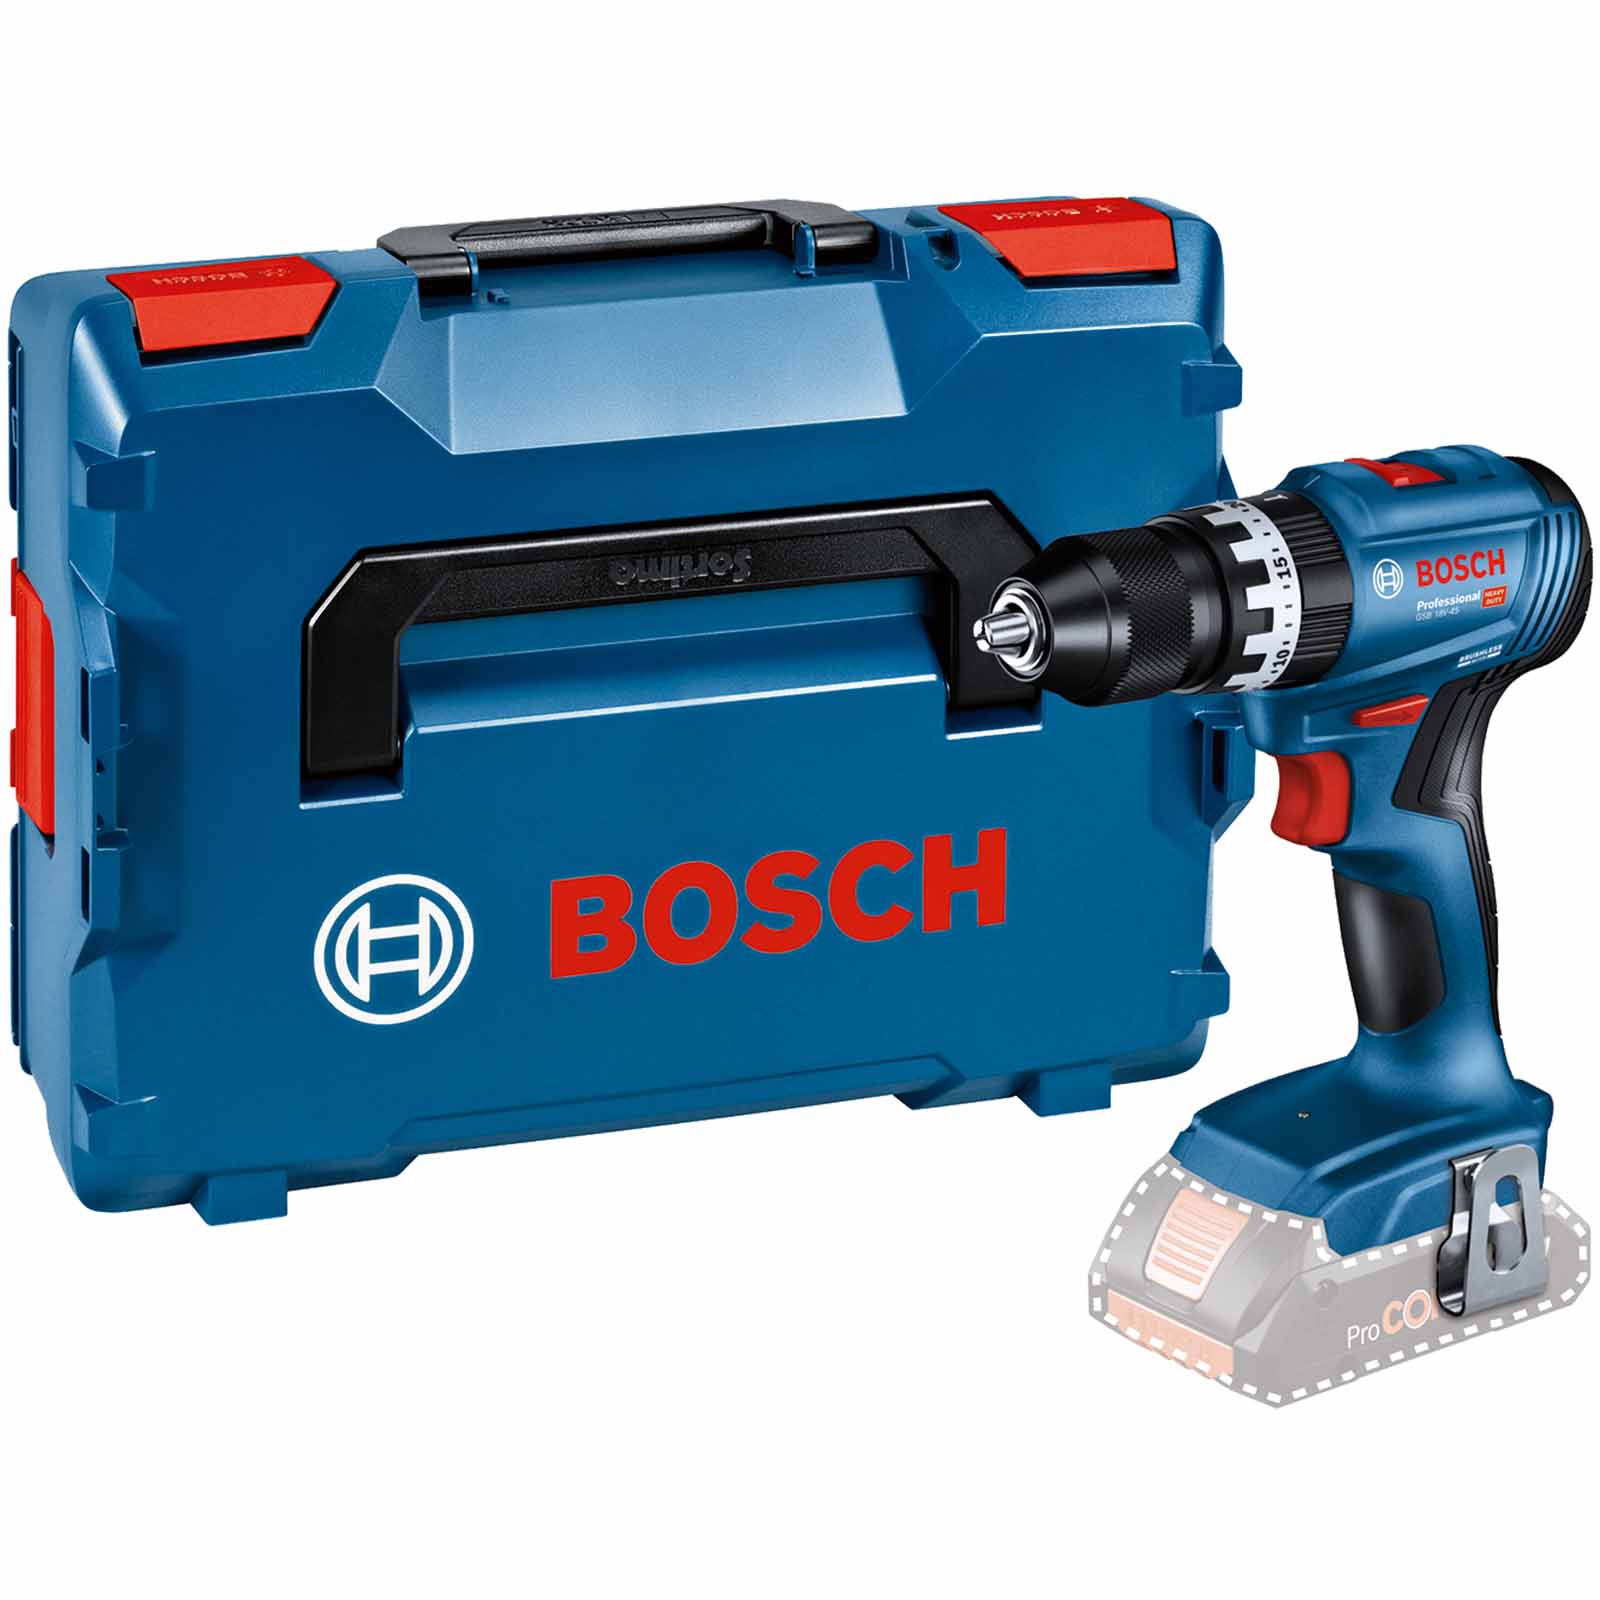 Bosch GSB 18V-45 18v Cordless Brushless Combi Drill No Batteries No Charger Case